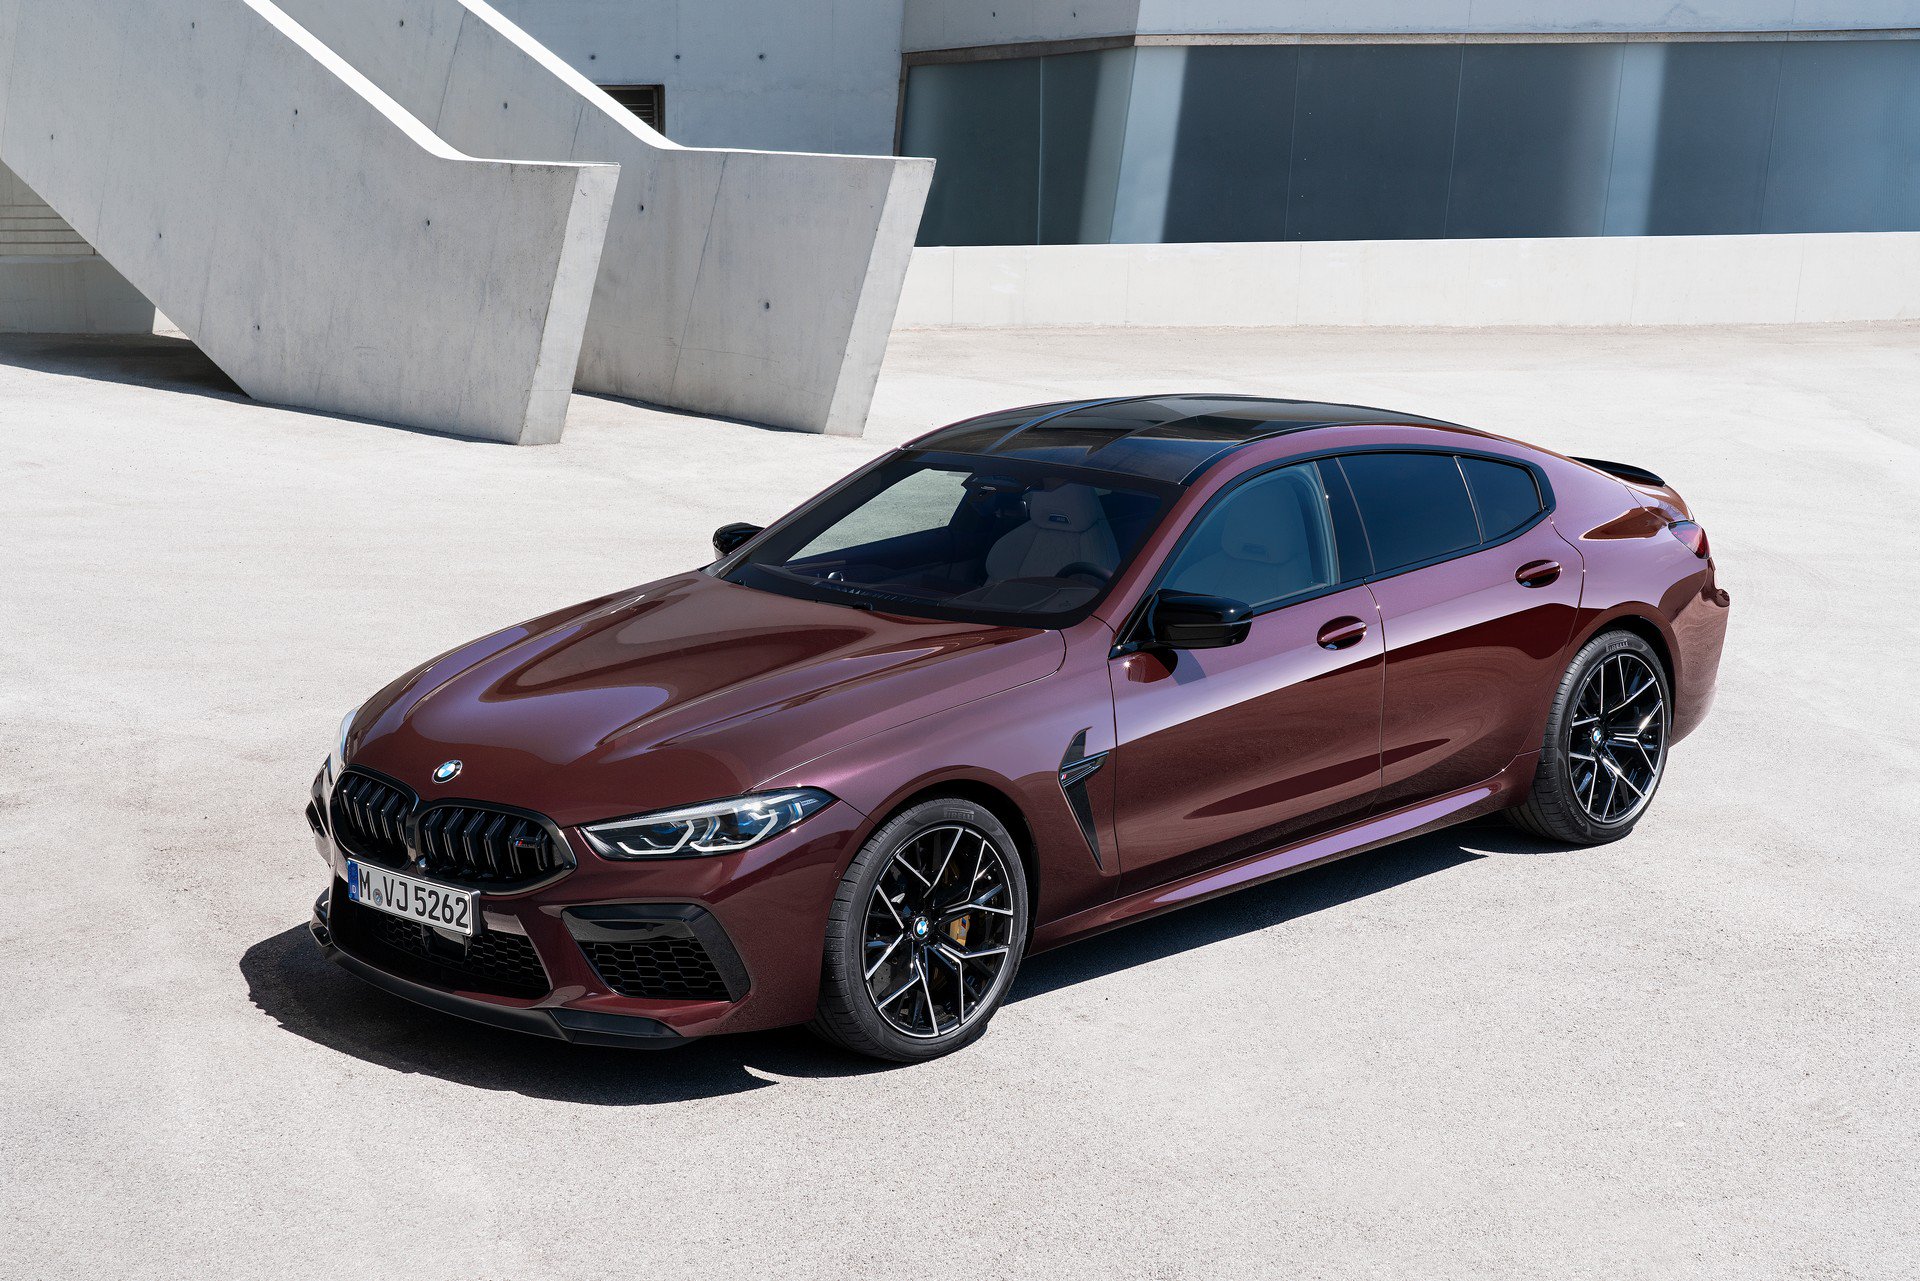 New BMW M8 Gran Coupe Revealed For 2020, First Edition Limited To 400